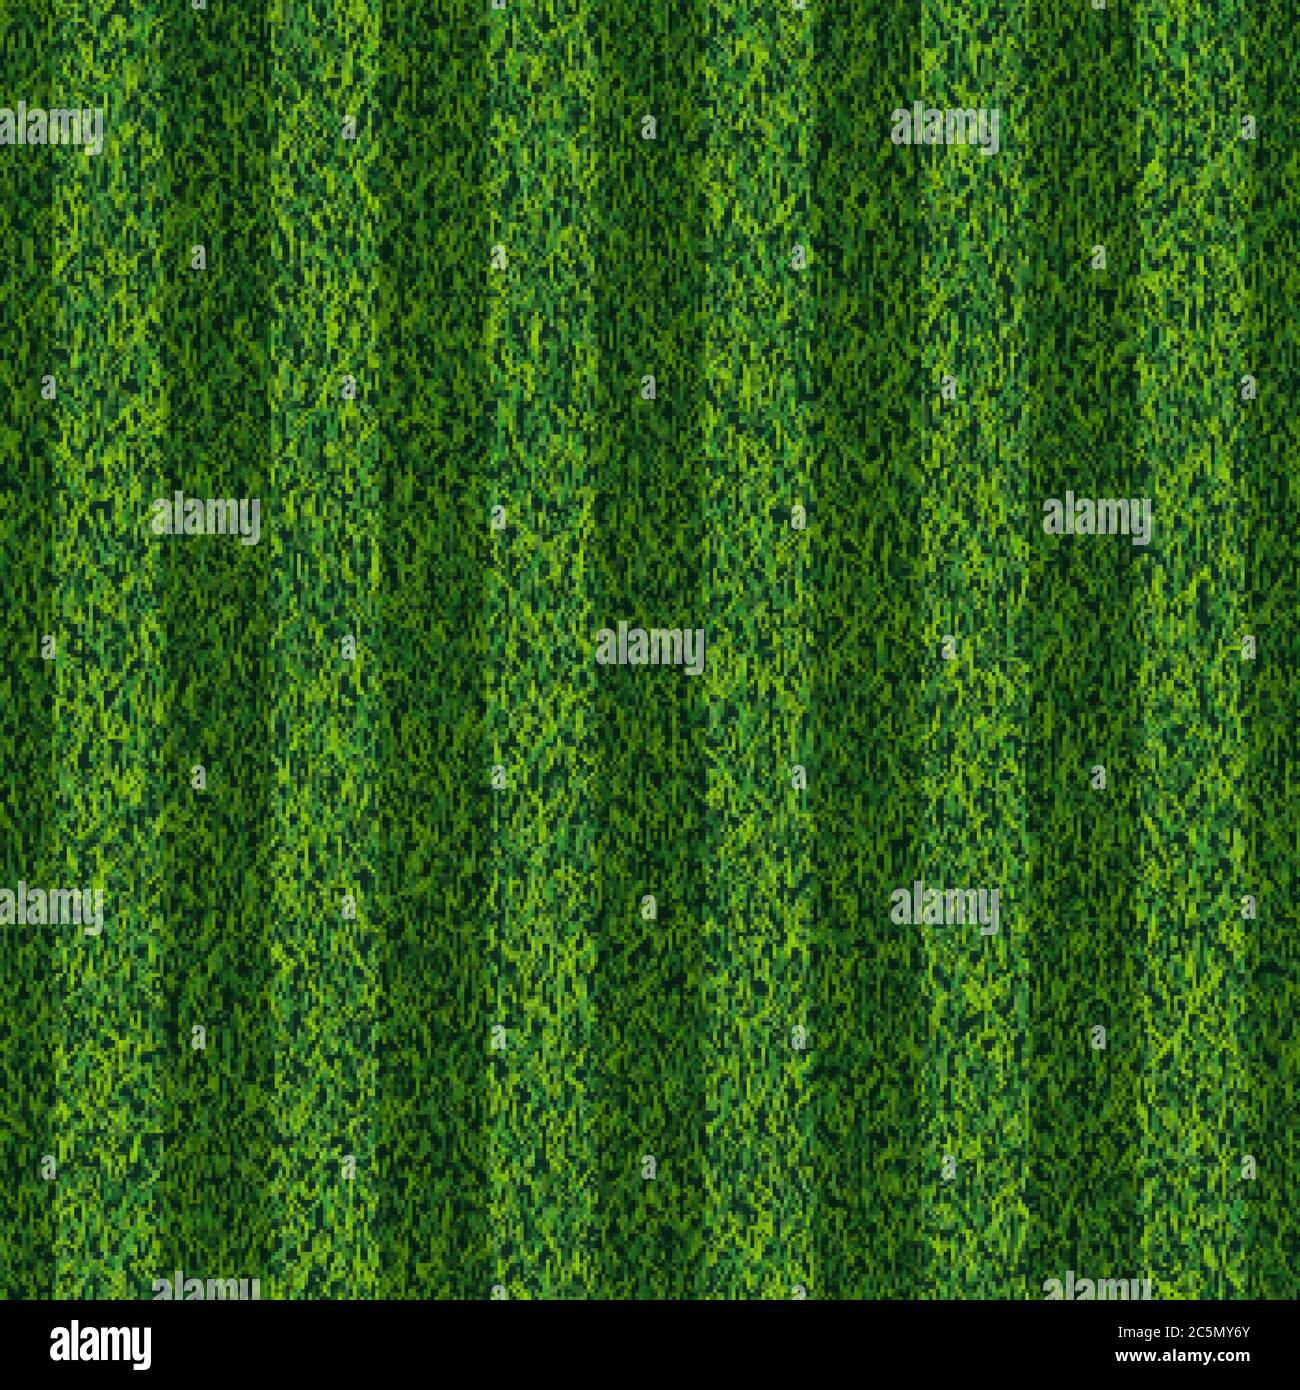 Soccer, football stripe field backdrop. Grass seamless realistic texture. Vector abstract nature illustration. Green lawn stadium background Stock Vector